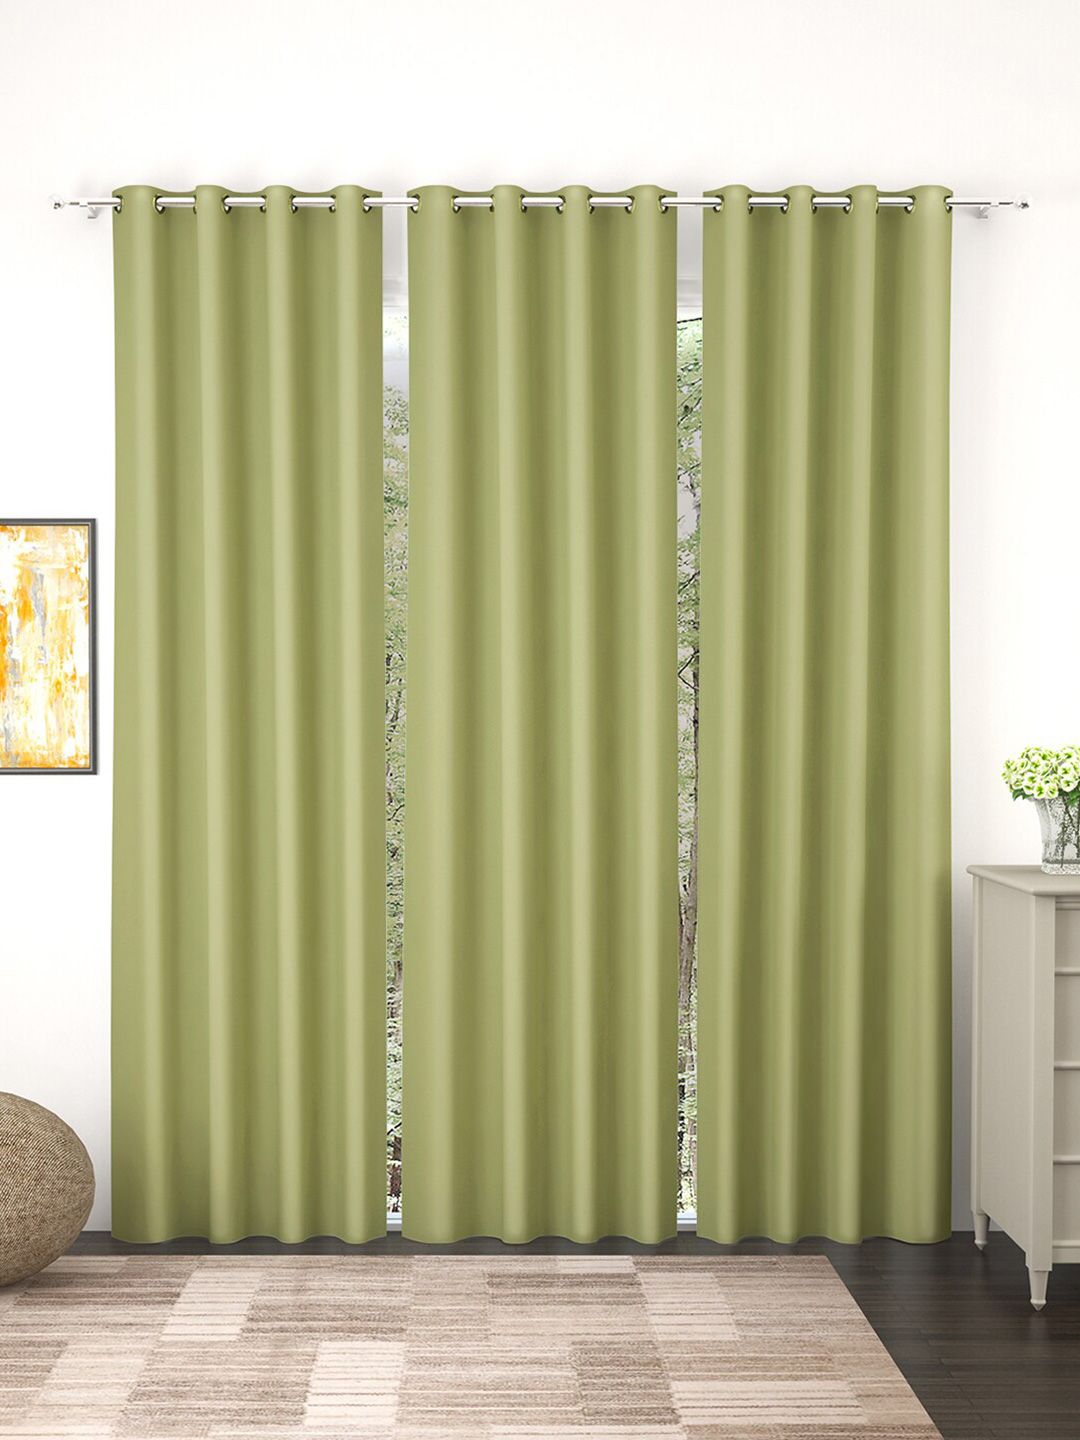 Story@home Set of 3 Lime Green 300 GSM Solid Black Out Door Curtain Price in India